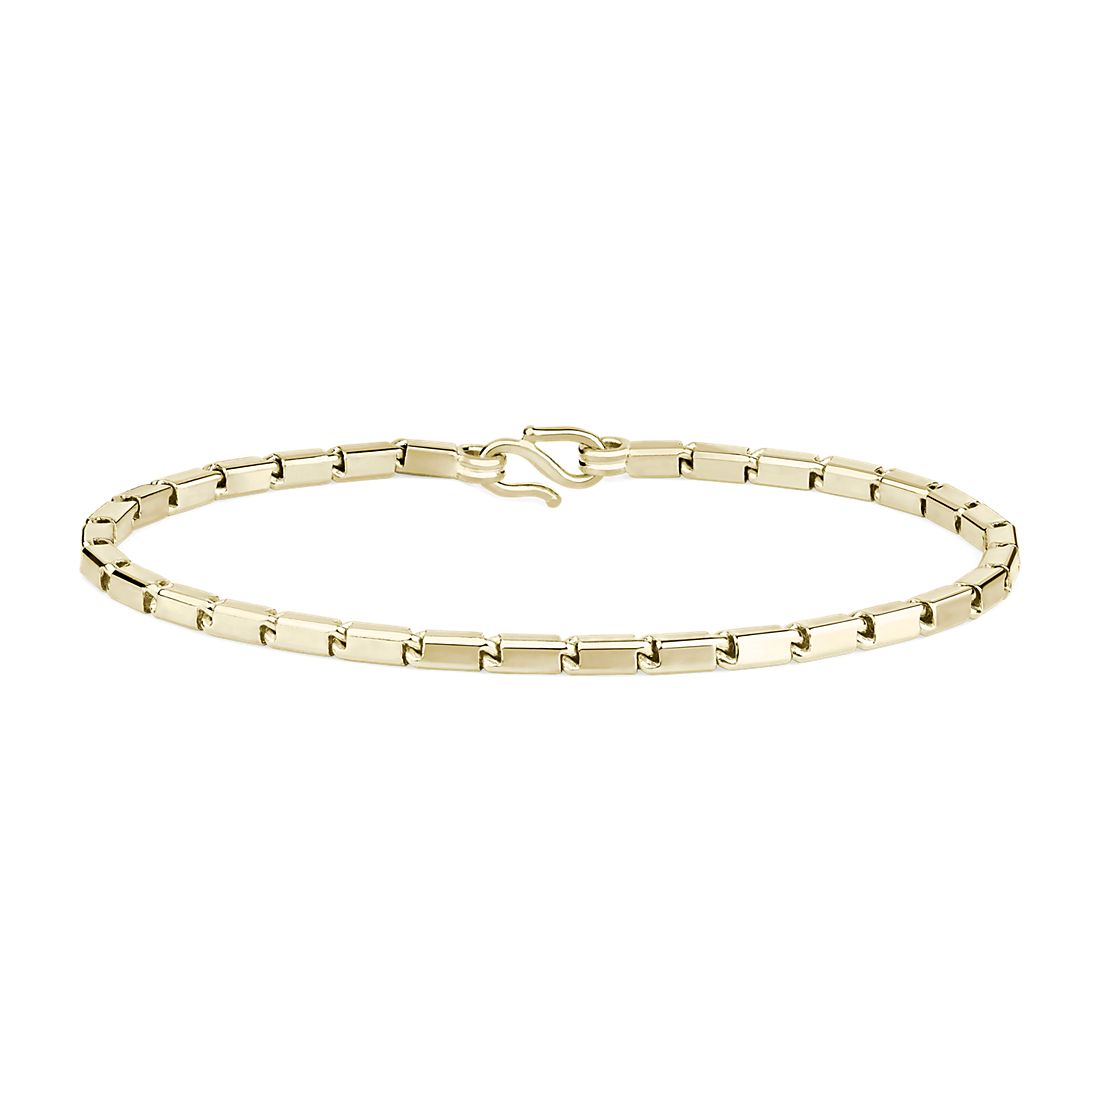 8" Handmade Square Chain Bracelet in Solid 24k Yellow Gold (3 mm)